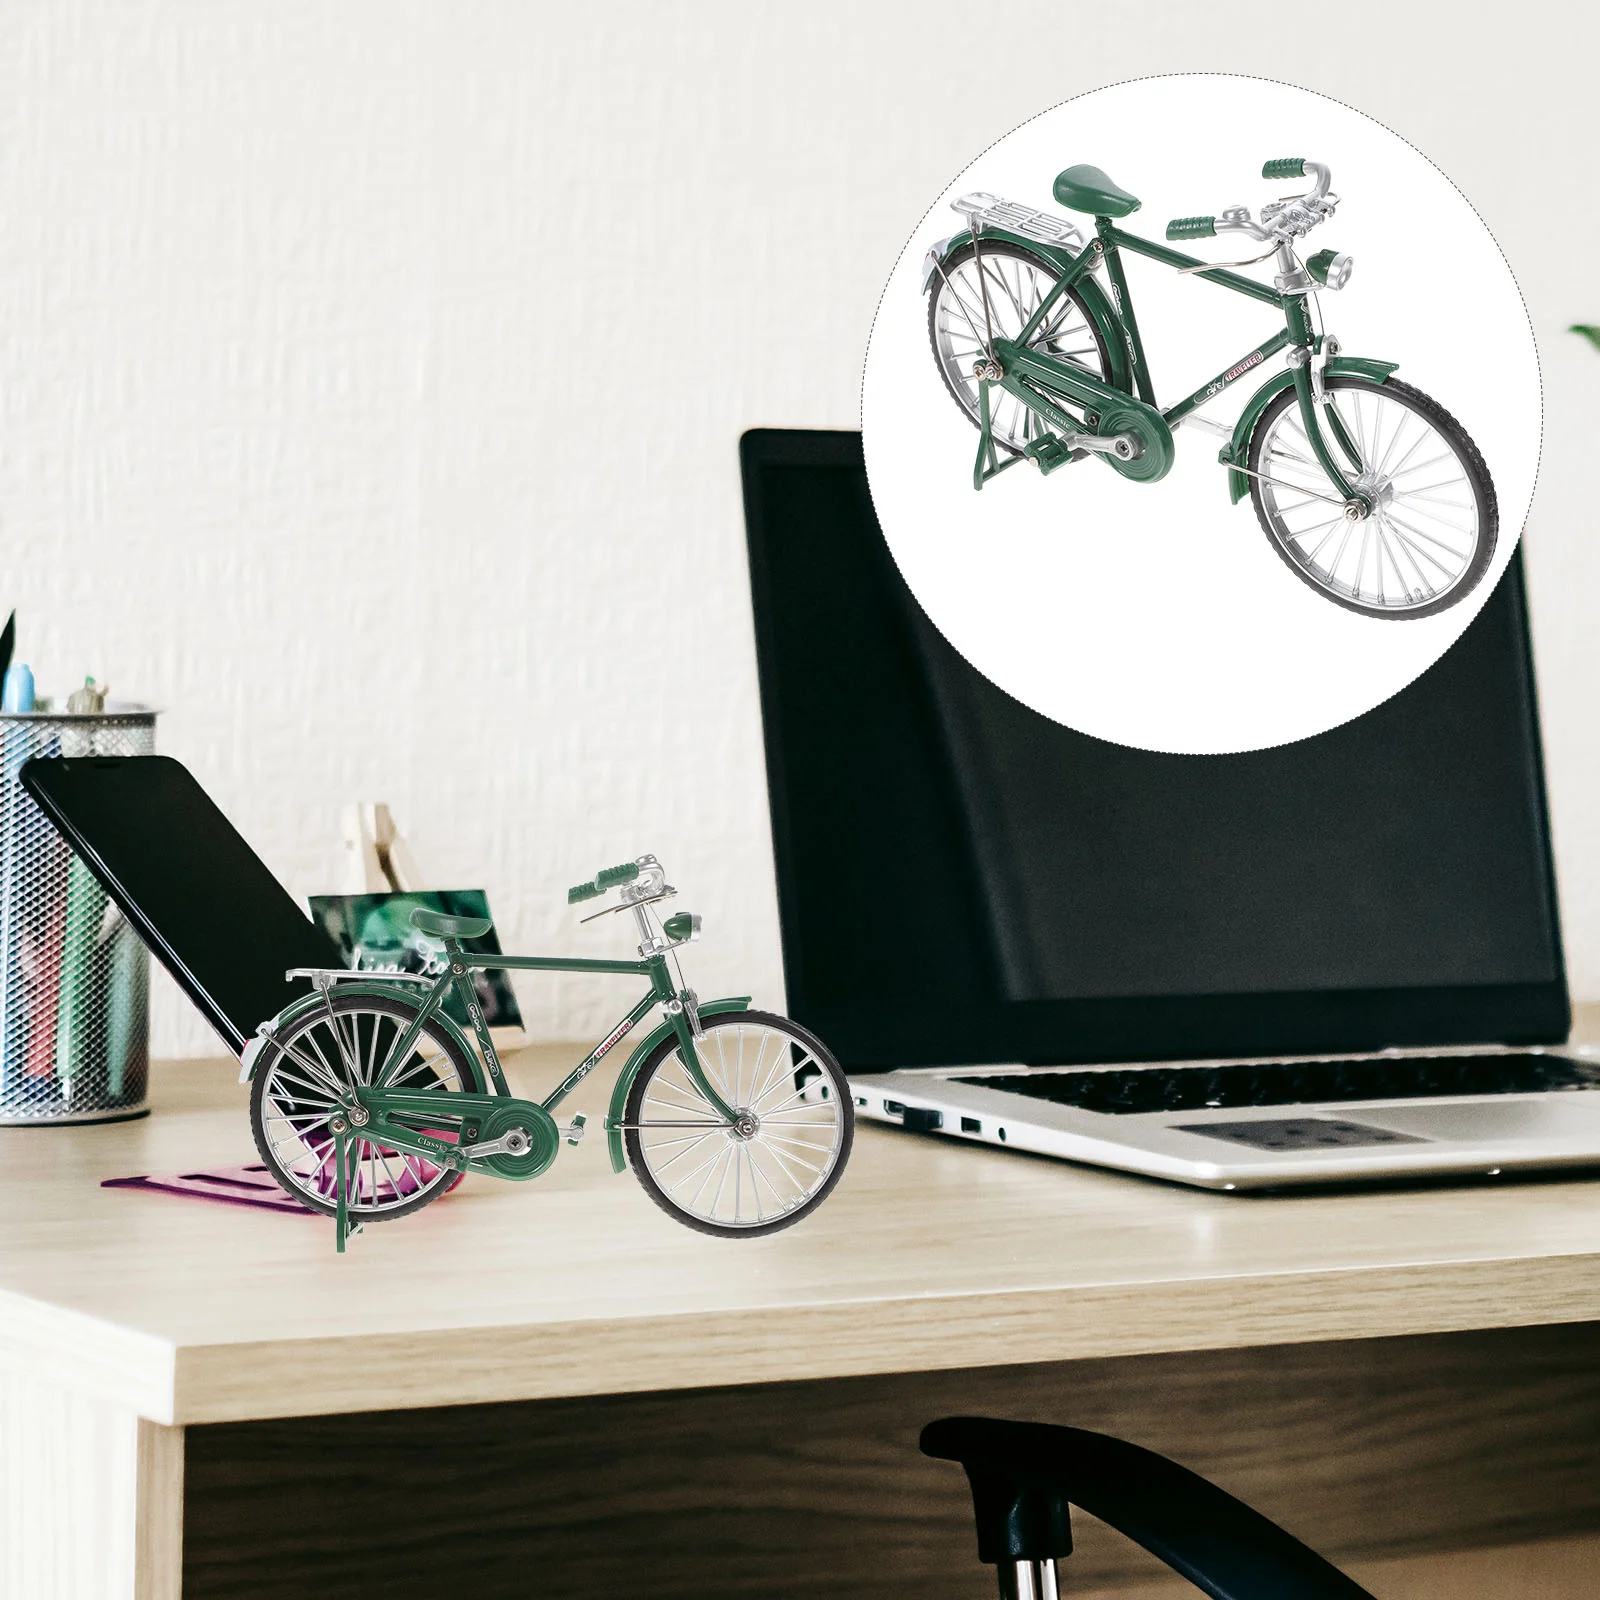 

Iron Product Bicycle Model Travel Kids Mall Figurine Retro Ornaments Home Décor Alloy Bike Decoration